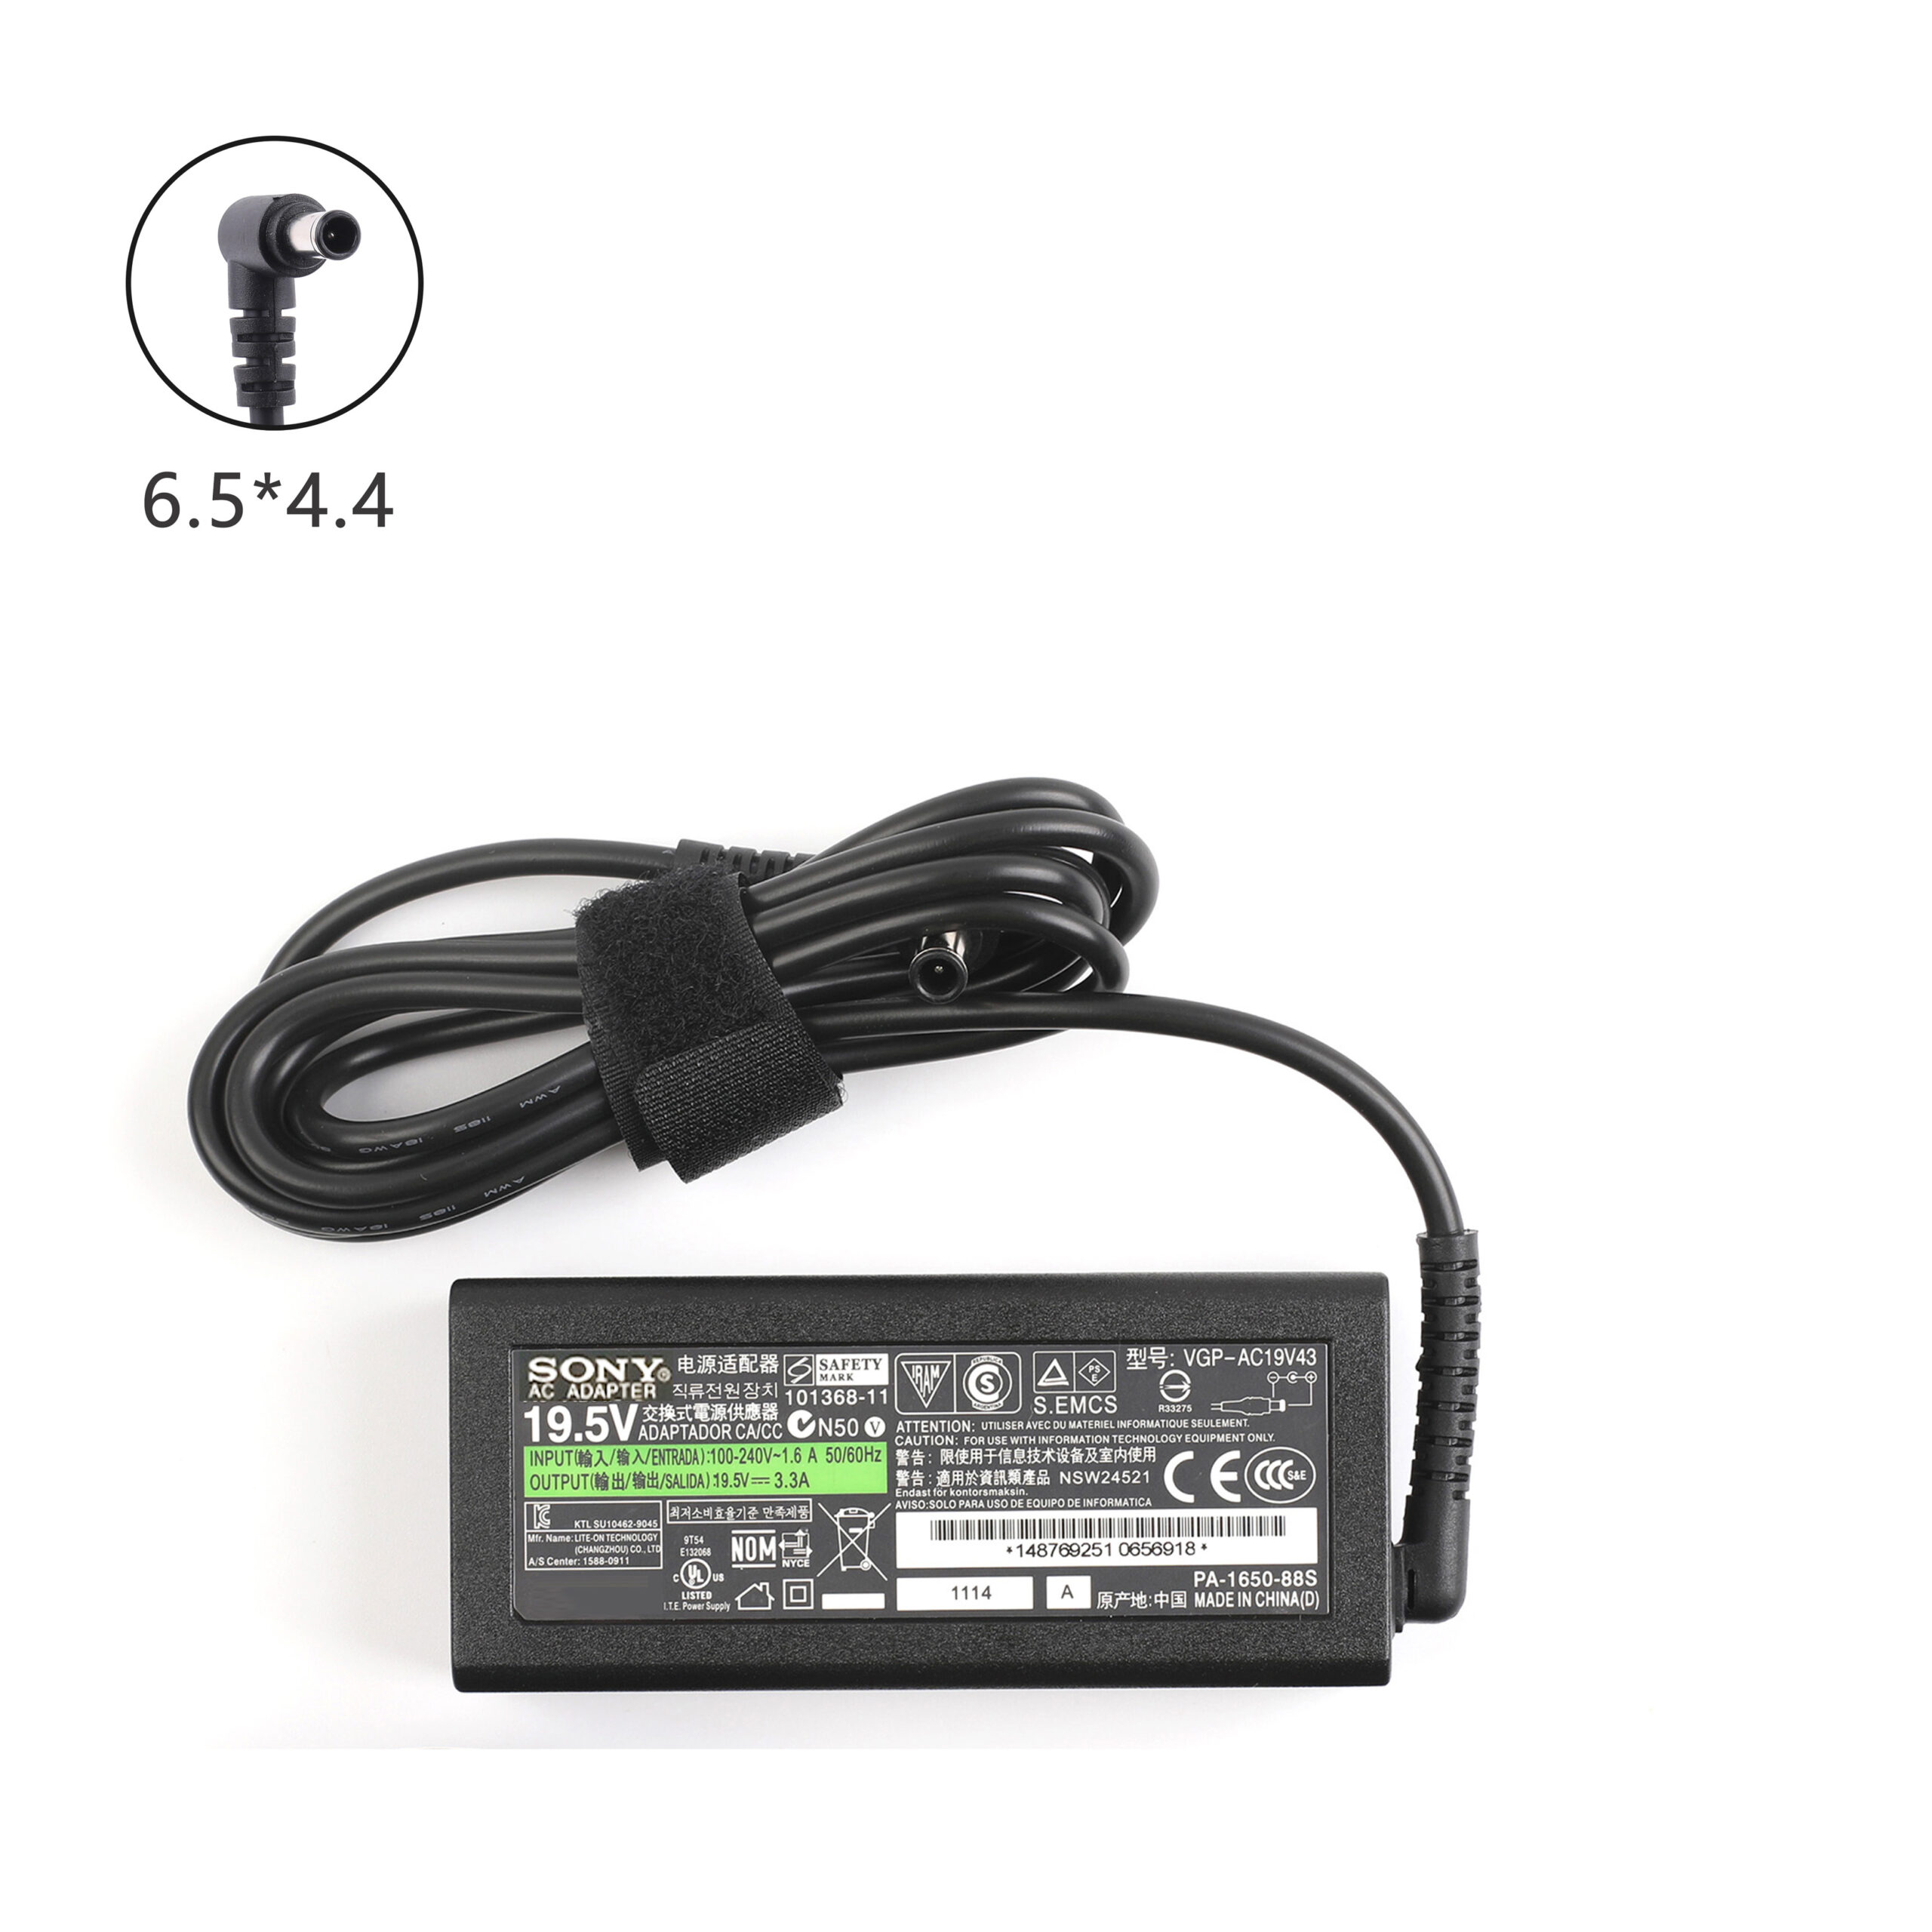 Sony GP-AC19V78 Vaio VPCEB Sony 65W 19.5V 3.3A 6.5 4.4MM Adaptateur Chargeur Adapter